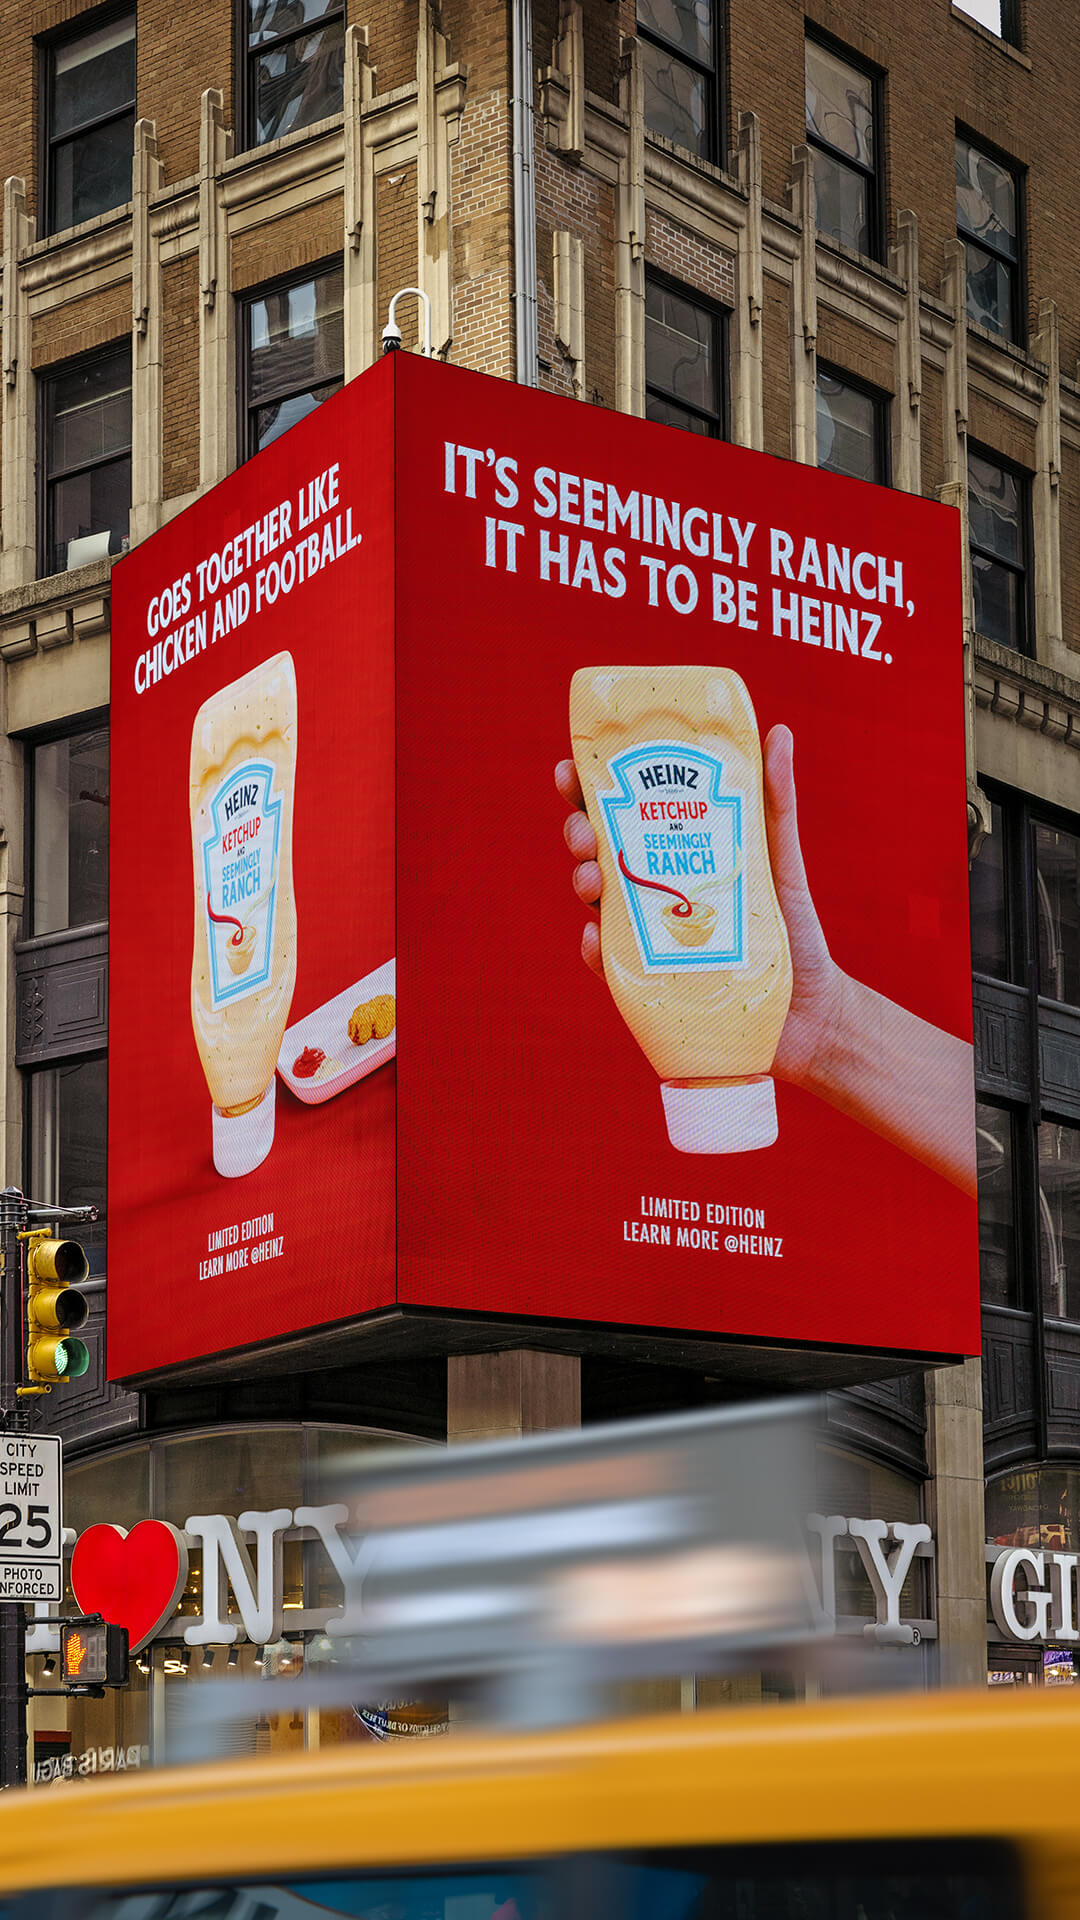 Heinz Ketchup and Seemingly Ranch_2023_Taylor Swift_New York ad